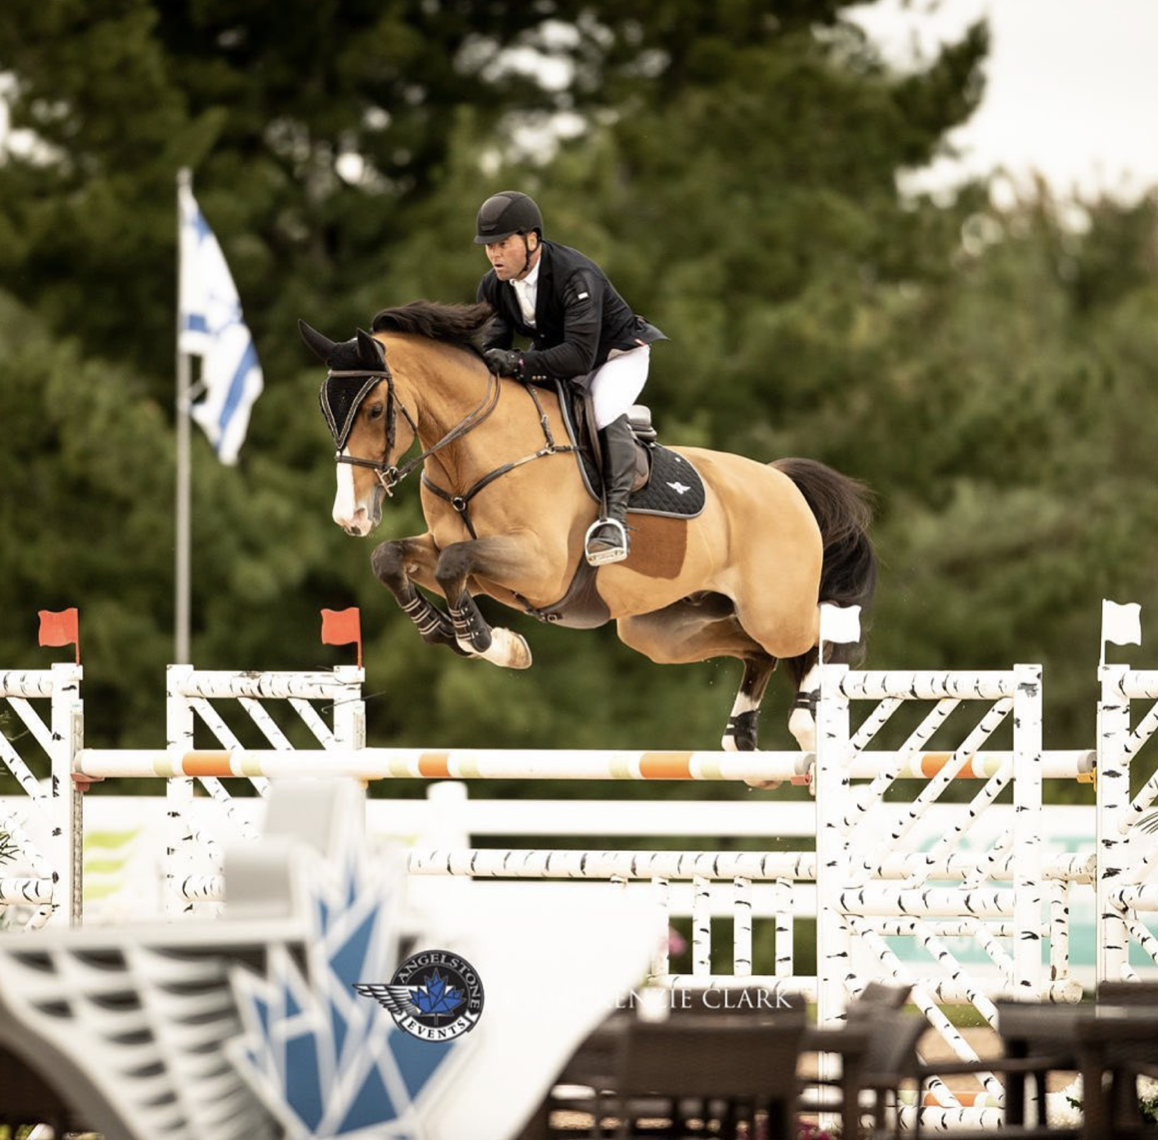 Enzo and Kyle on their way to a double clean at a 5* Grand Prix event. Photo: Mackenzie Clark